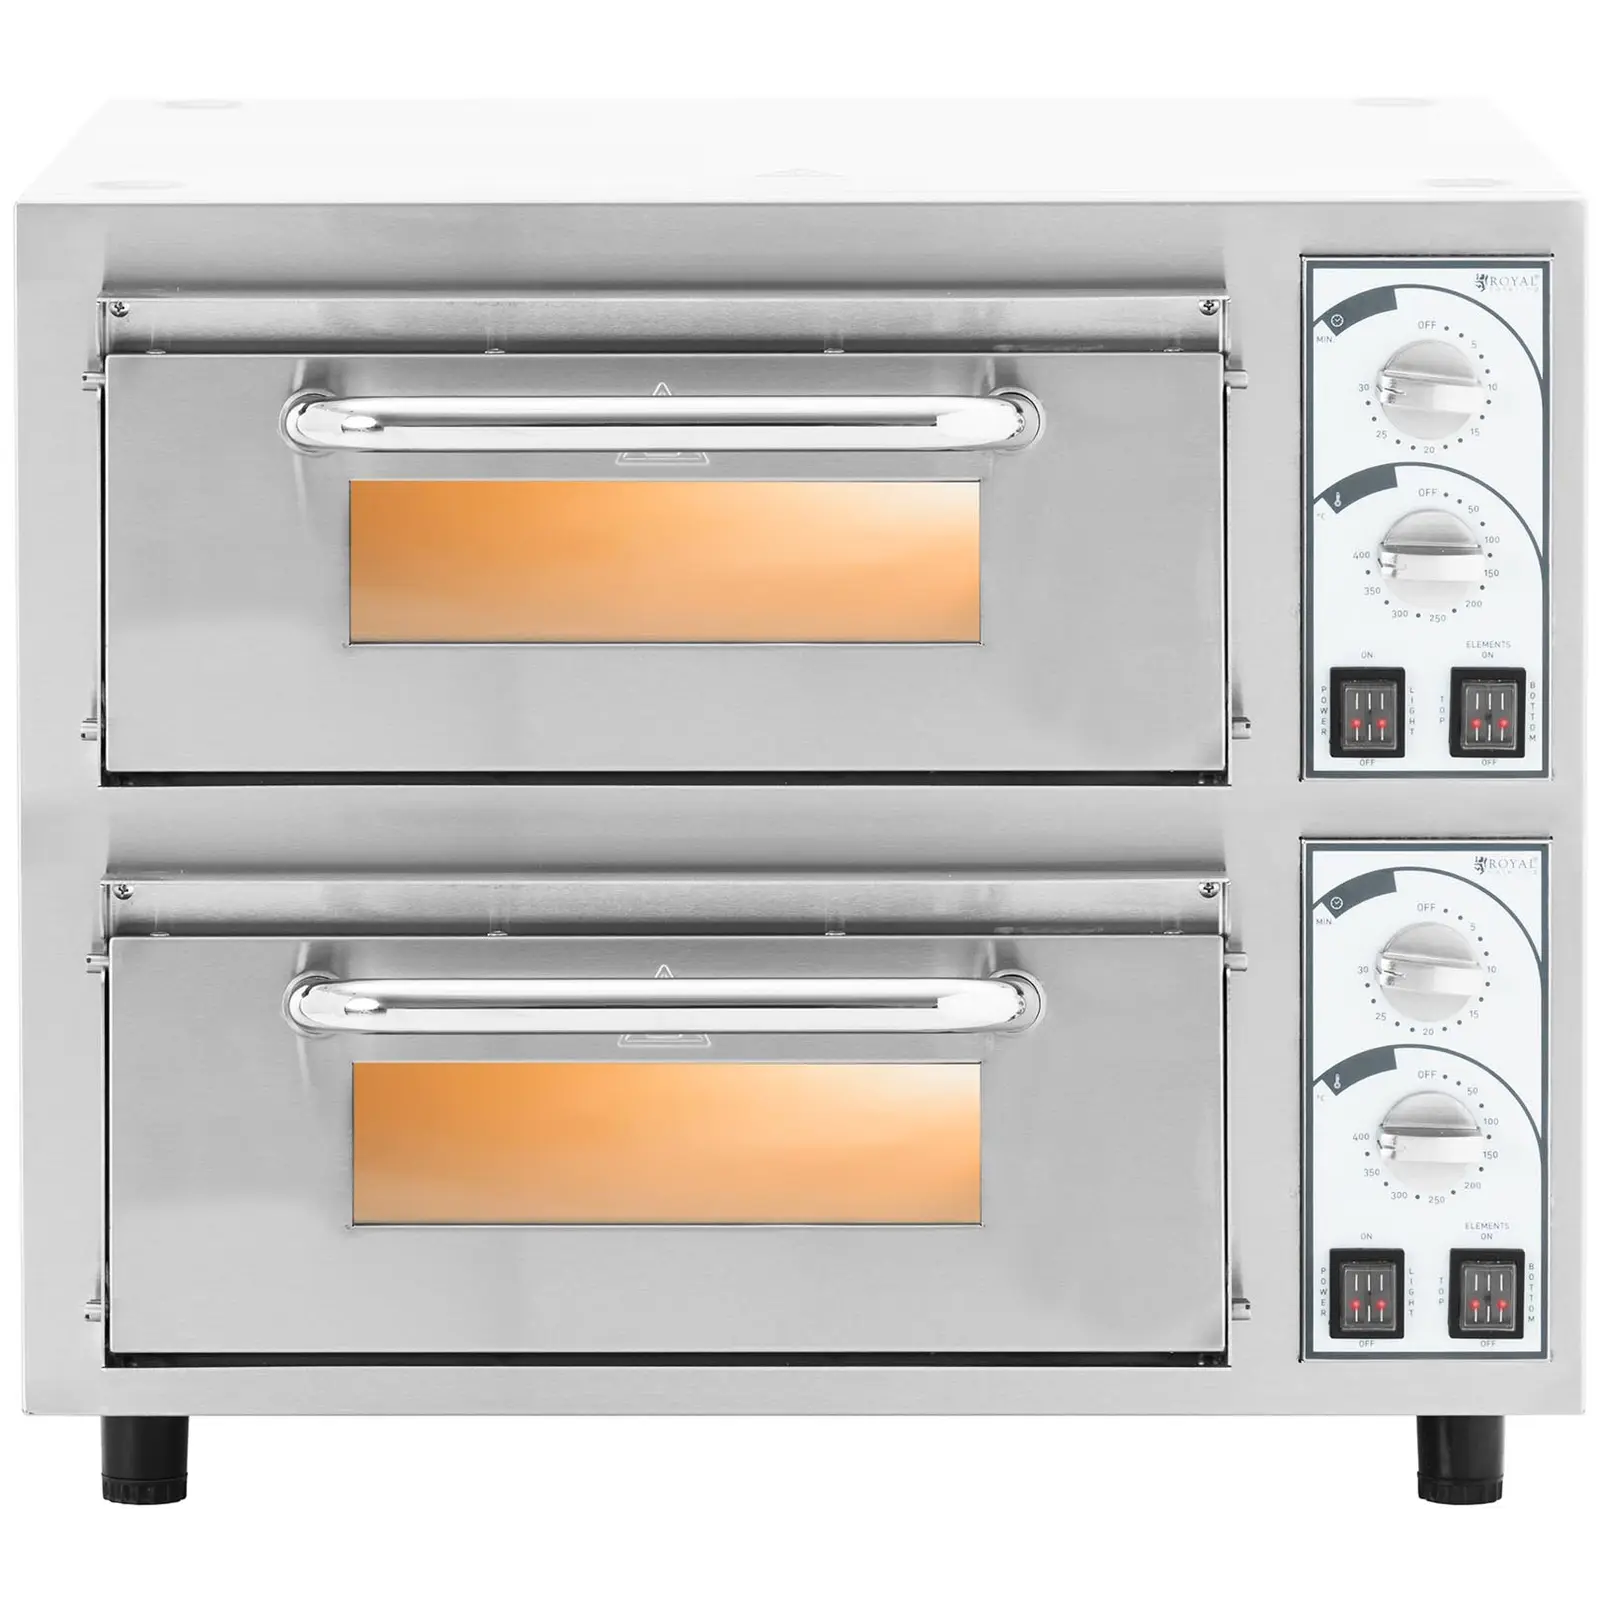 Pizzaovn - 2 kammer - 4400 W - Ø 35 cm - ildfast stein - Royal Catering